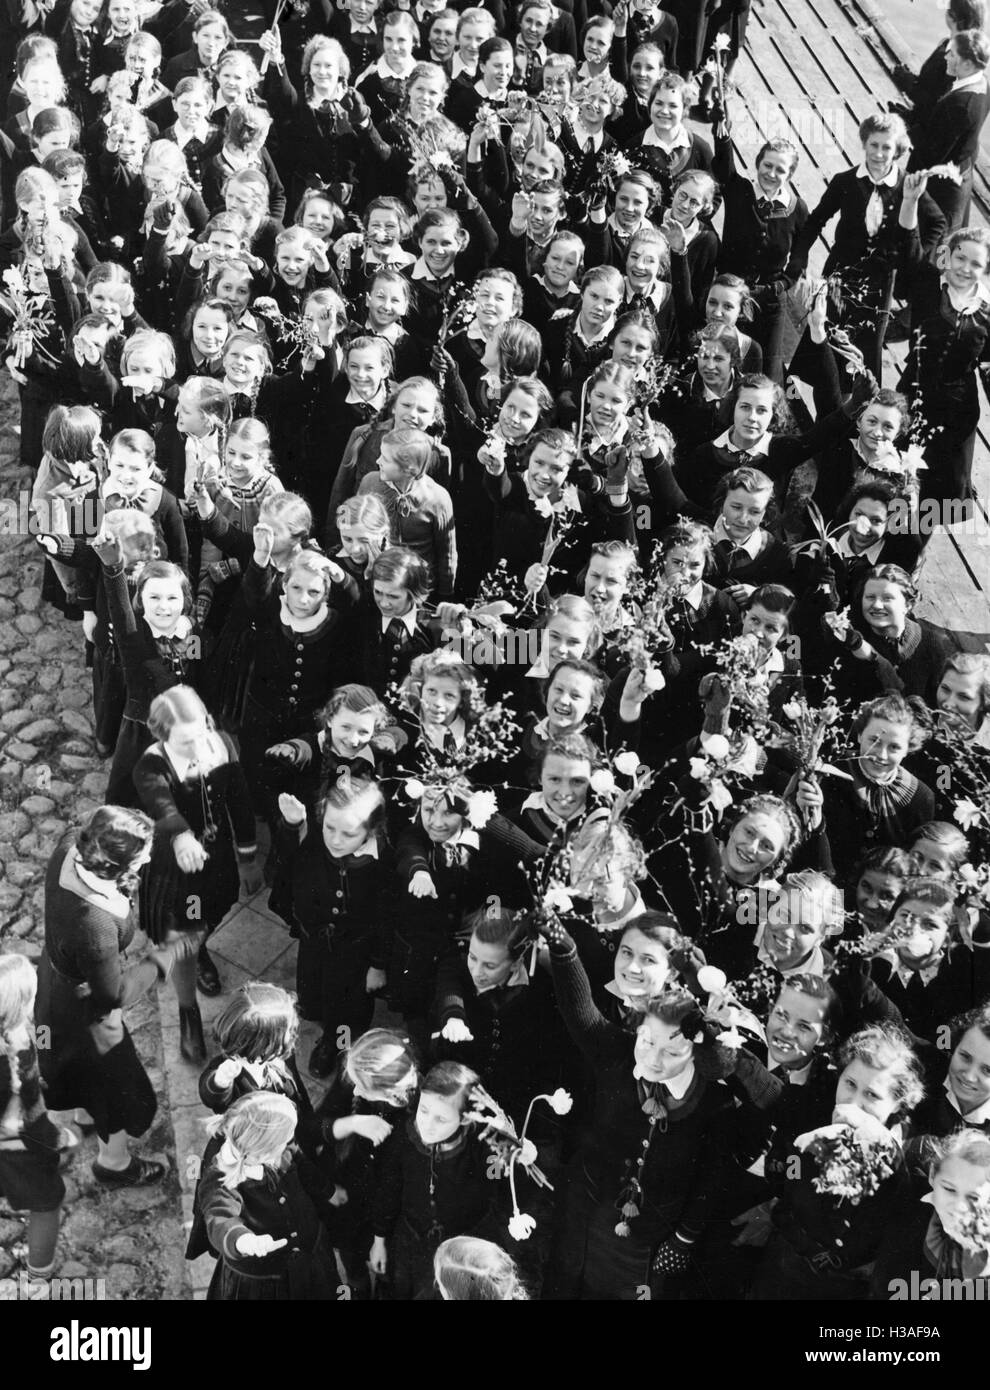 Residents of the Memel region celebrate the integration of the Klaipeda Region into the German Reich, 1939 Stock Photo